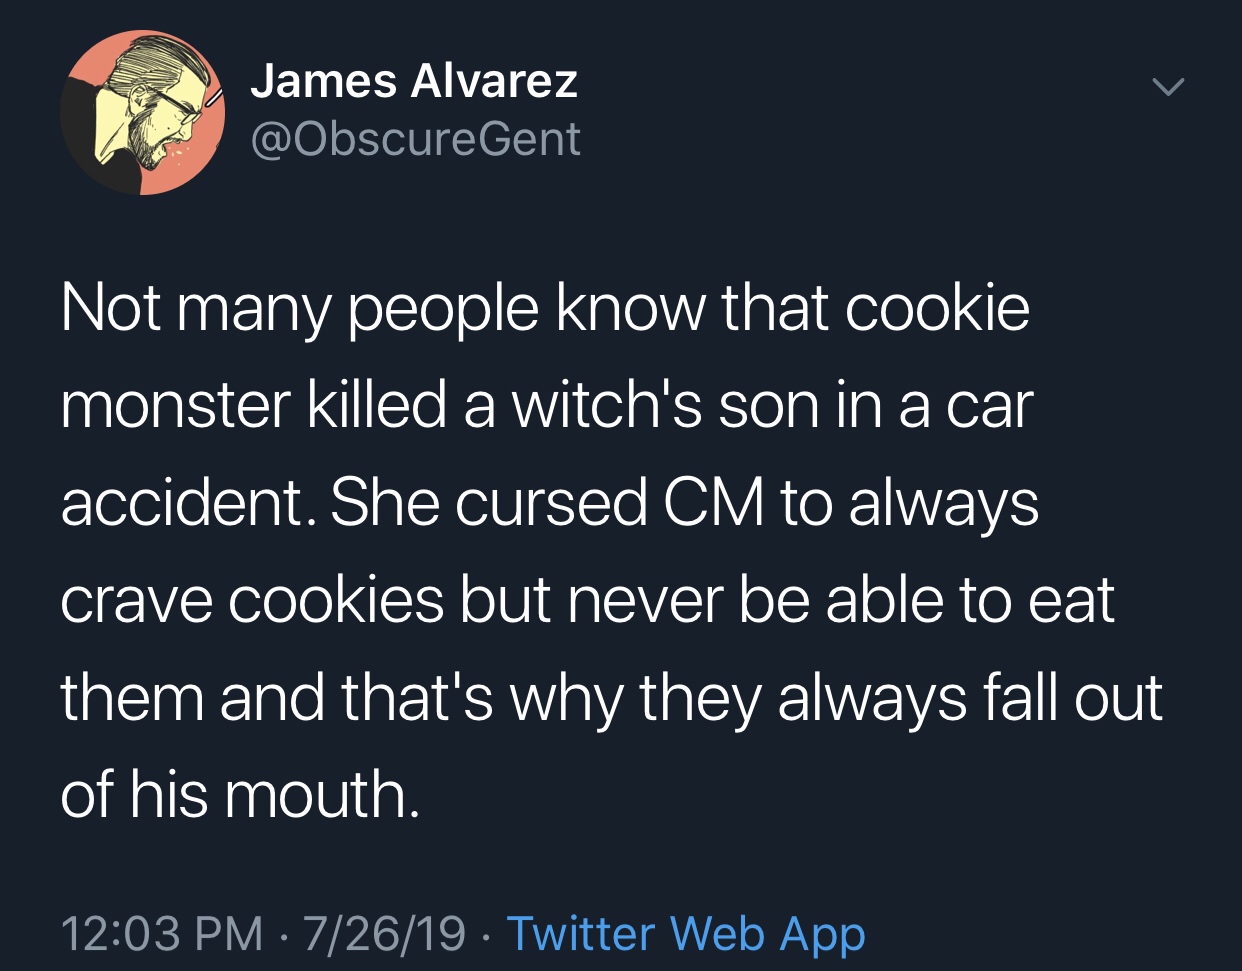 Humour - James Alvarez Not many people know that cookie monster killed a witch's son in a car accident. She cursed Cm to always crave cookies but never be able to eat them and that's why they always fall out of his mouth. 72619. Twitter Web App